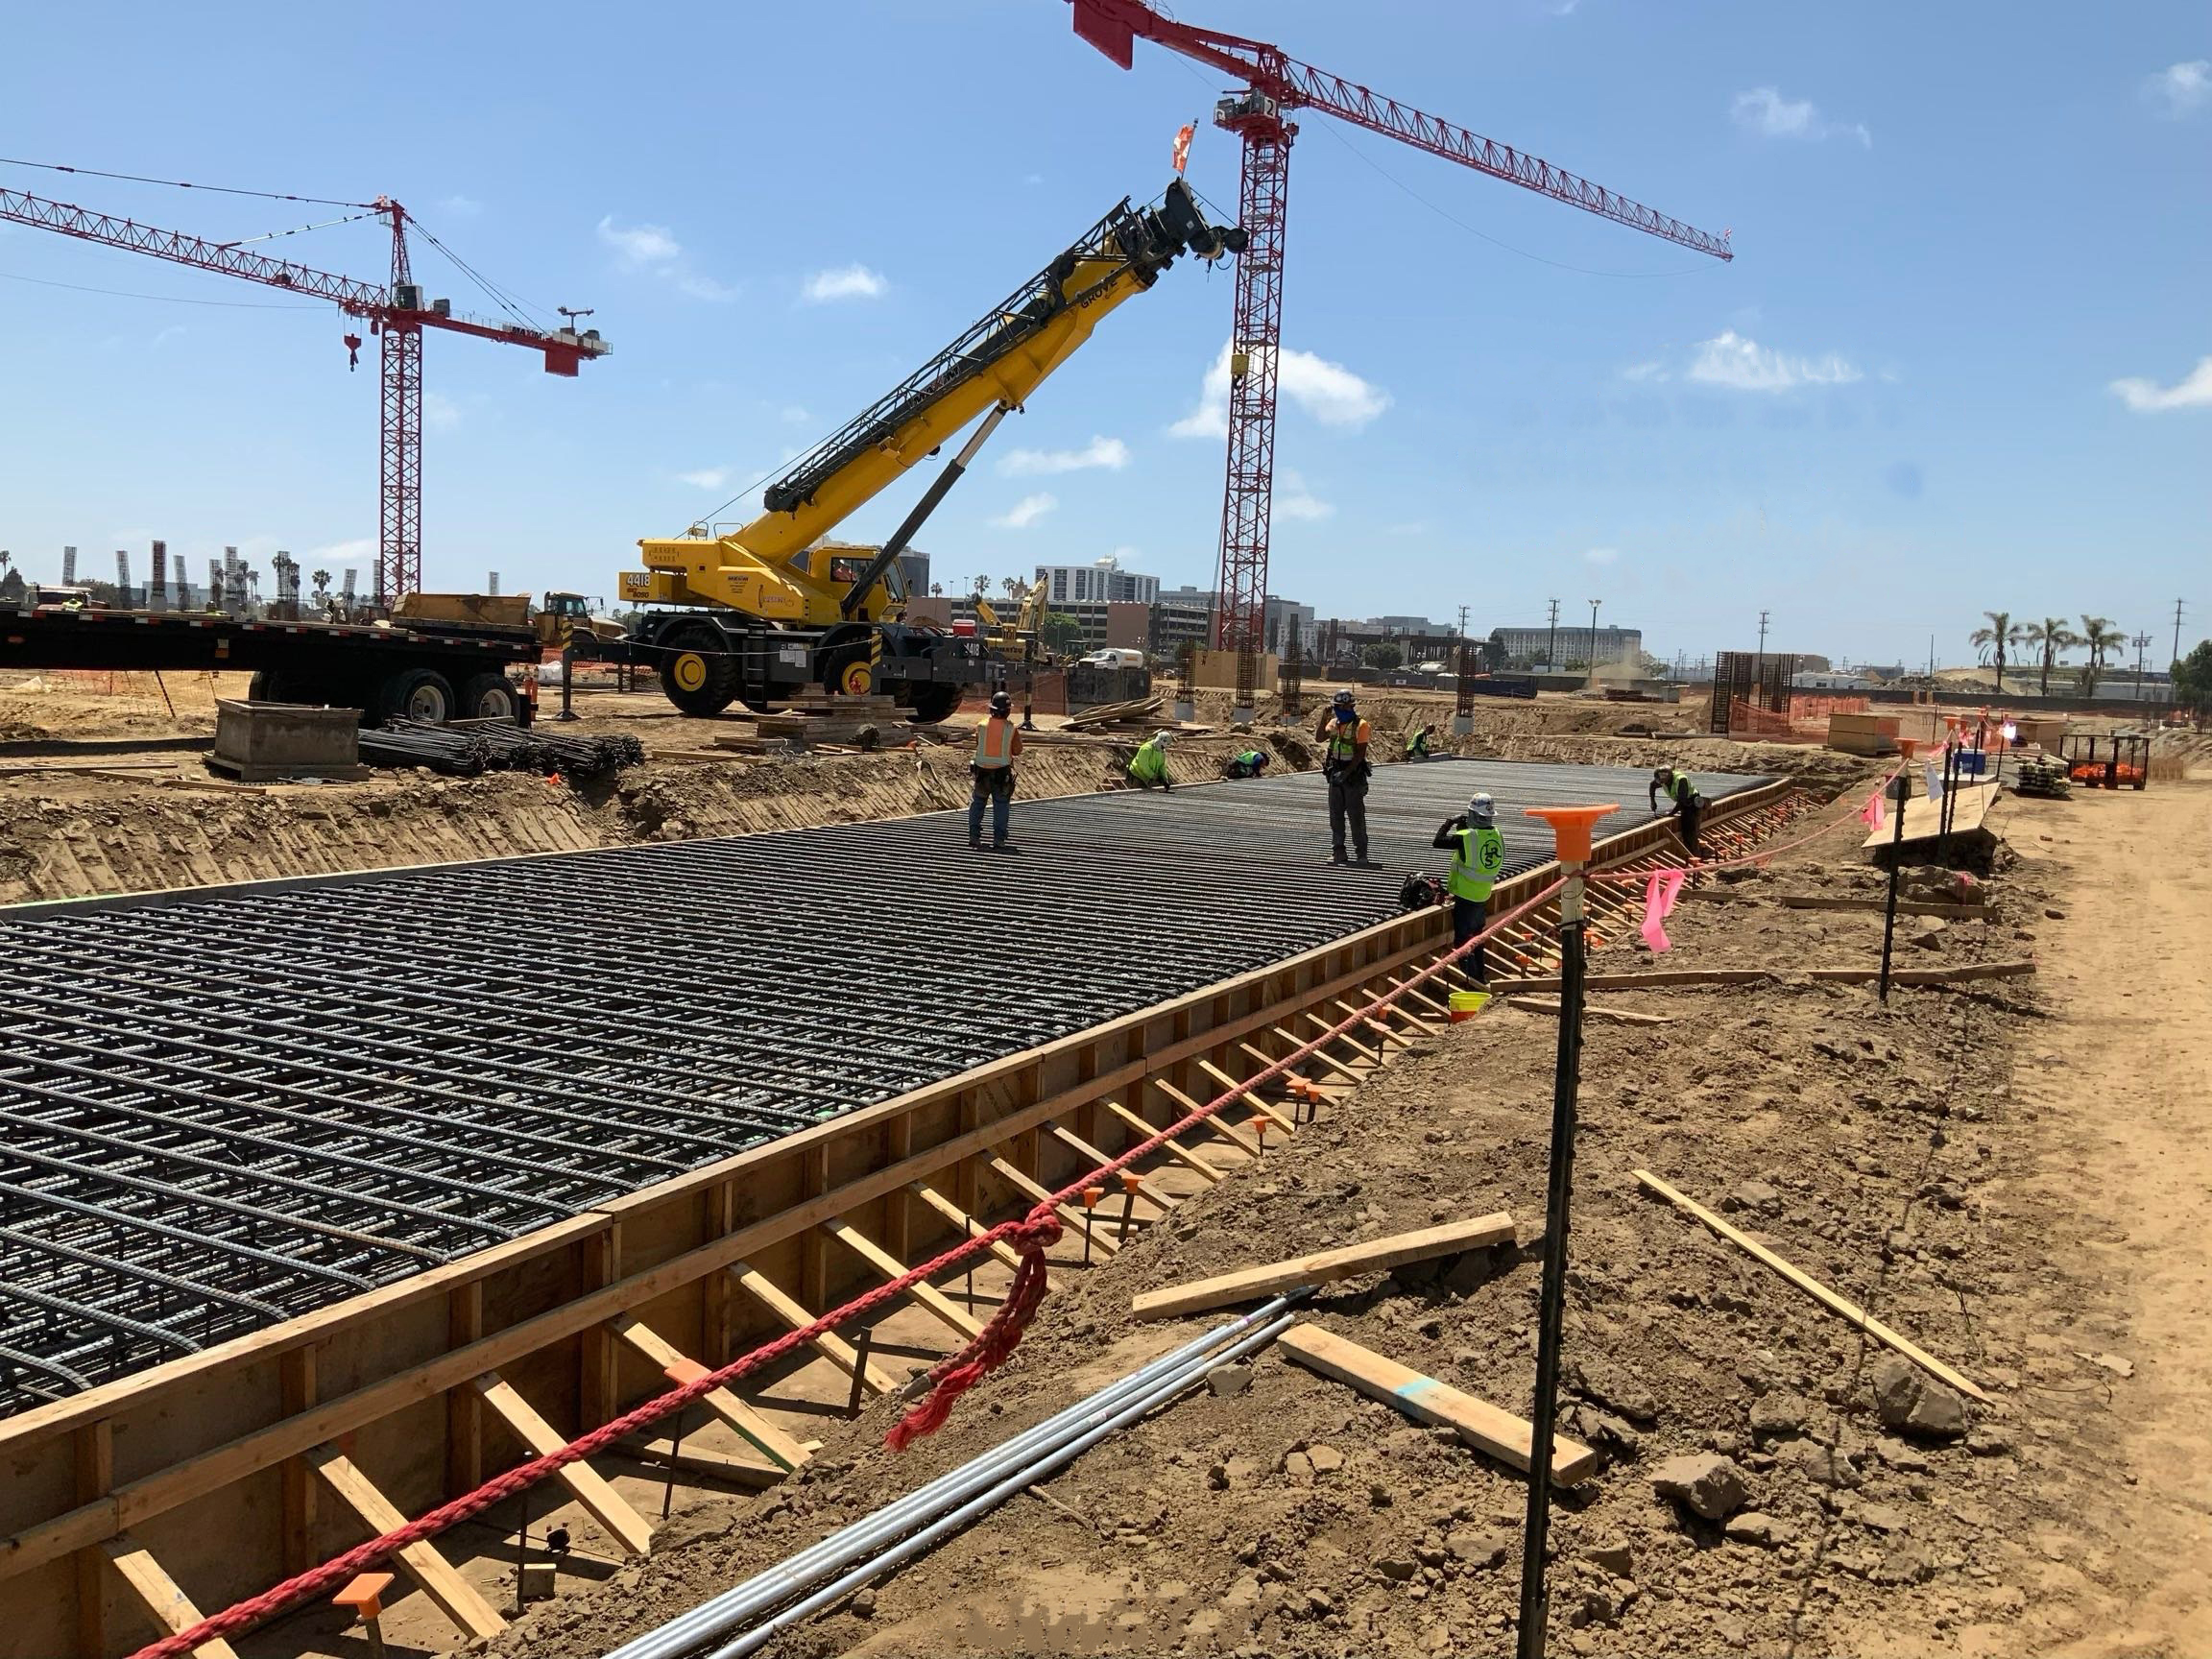 Rebar placement for shear walls at the Consolidated Rent-A-Car facility site.